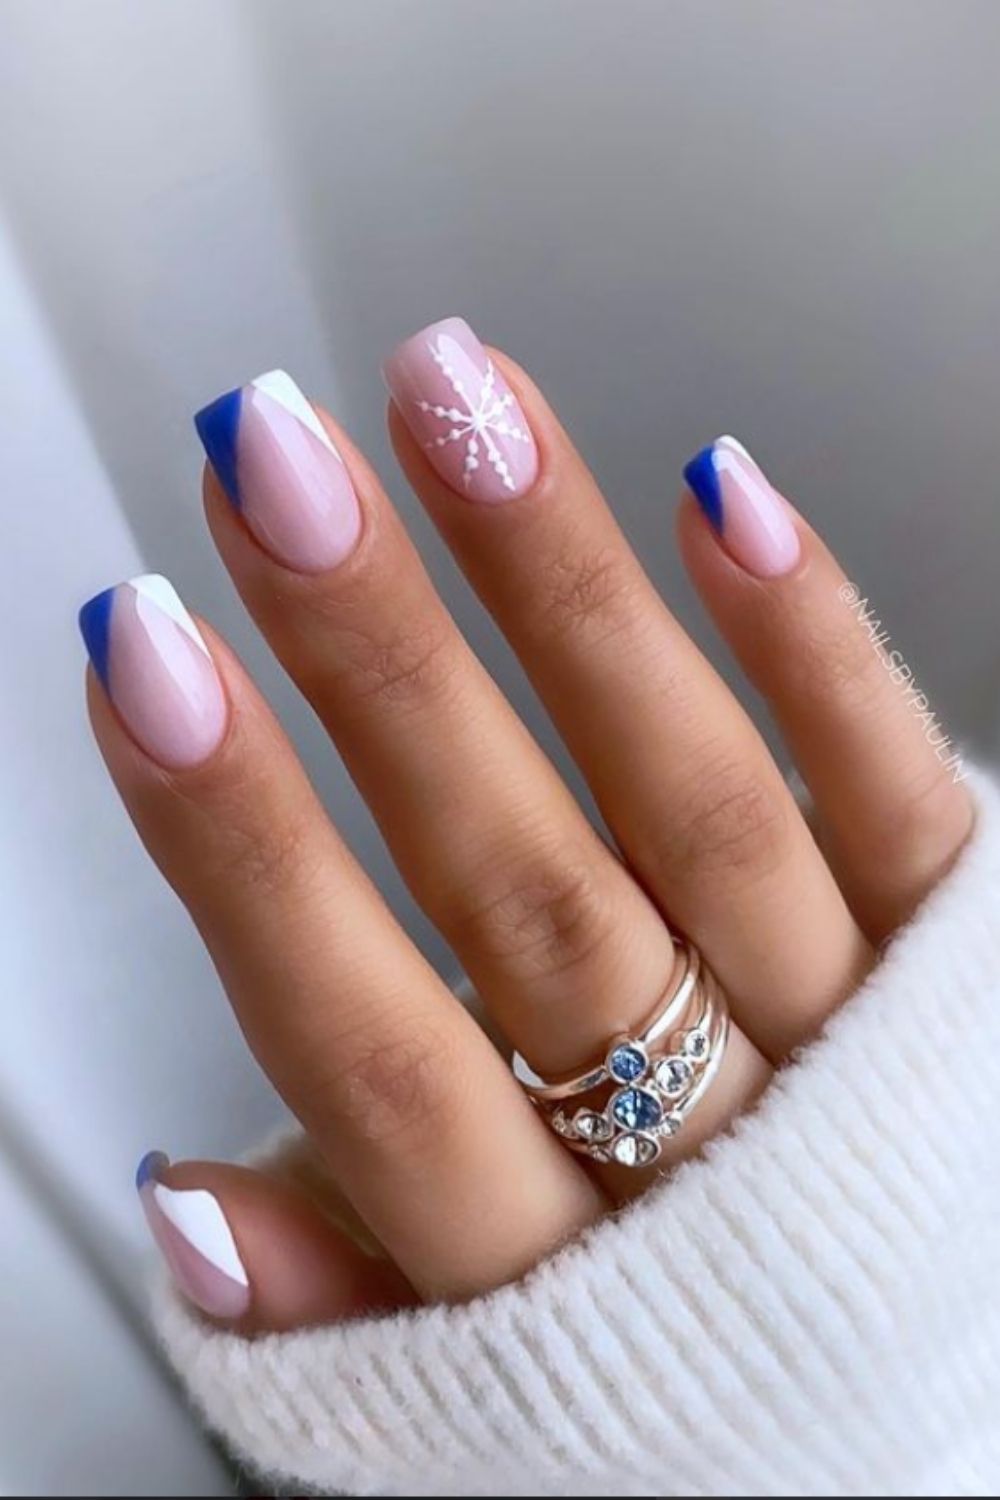 Blue and white,pink nails designs